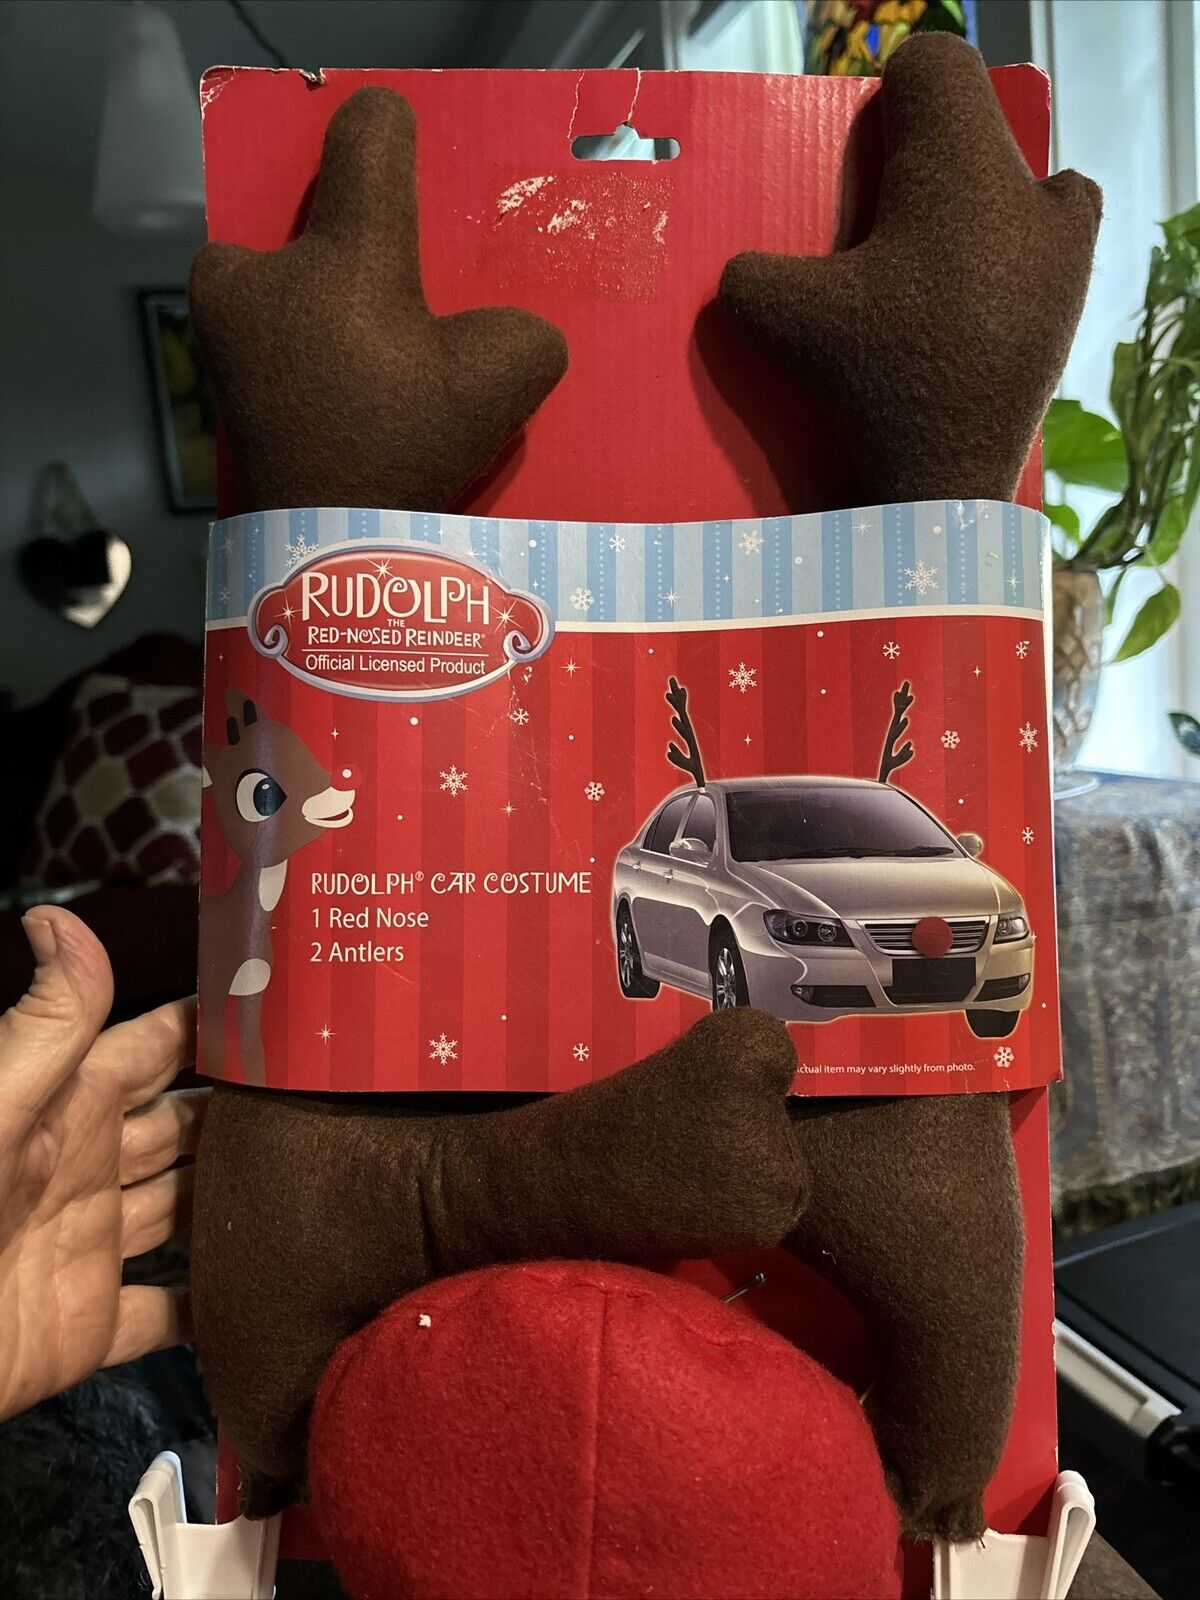 Rudolph the Red Nosed Reindeer Rudolph Car Costume 1 Red Nose 2 Antlers New